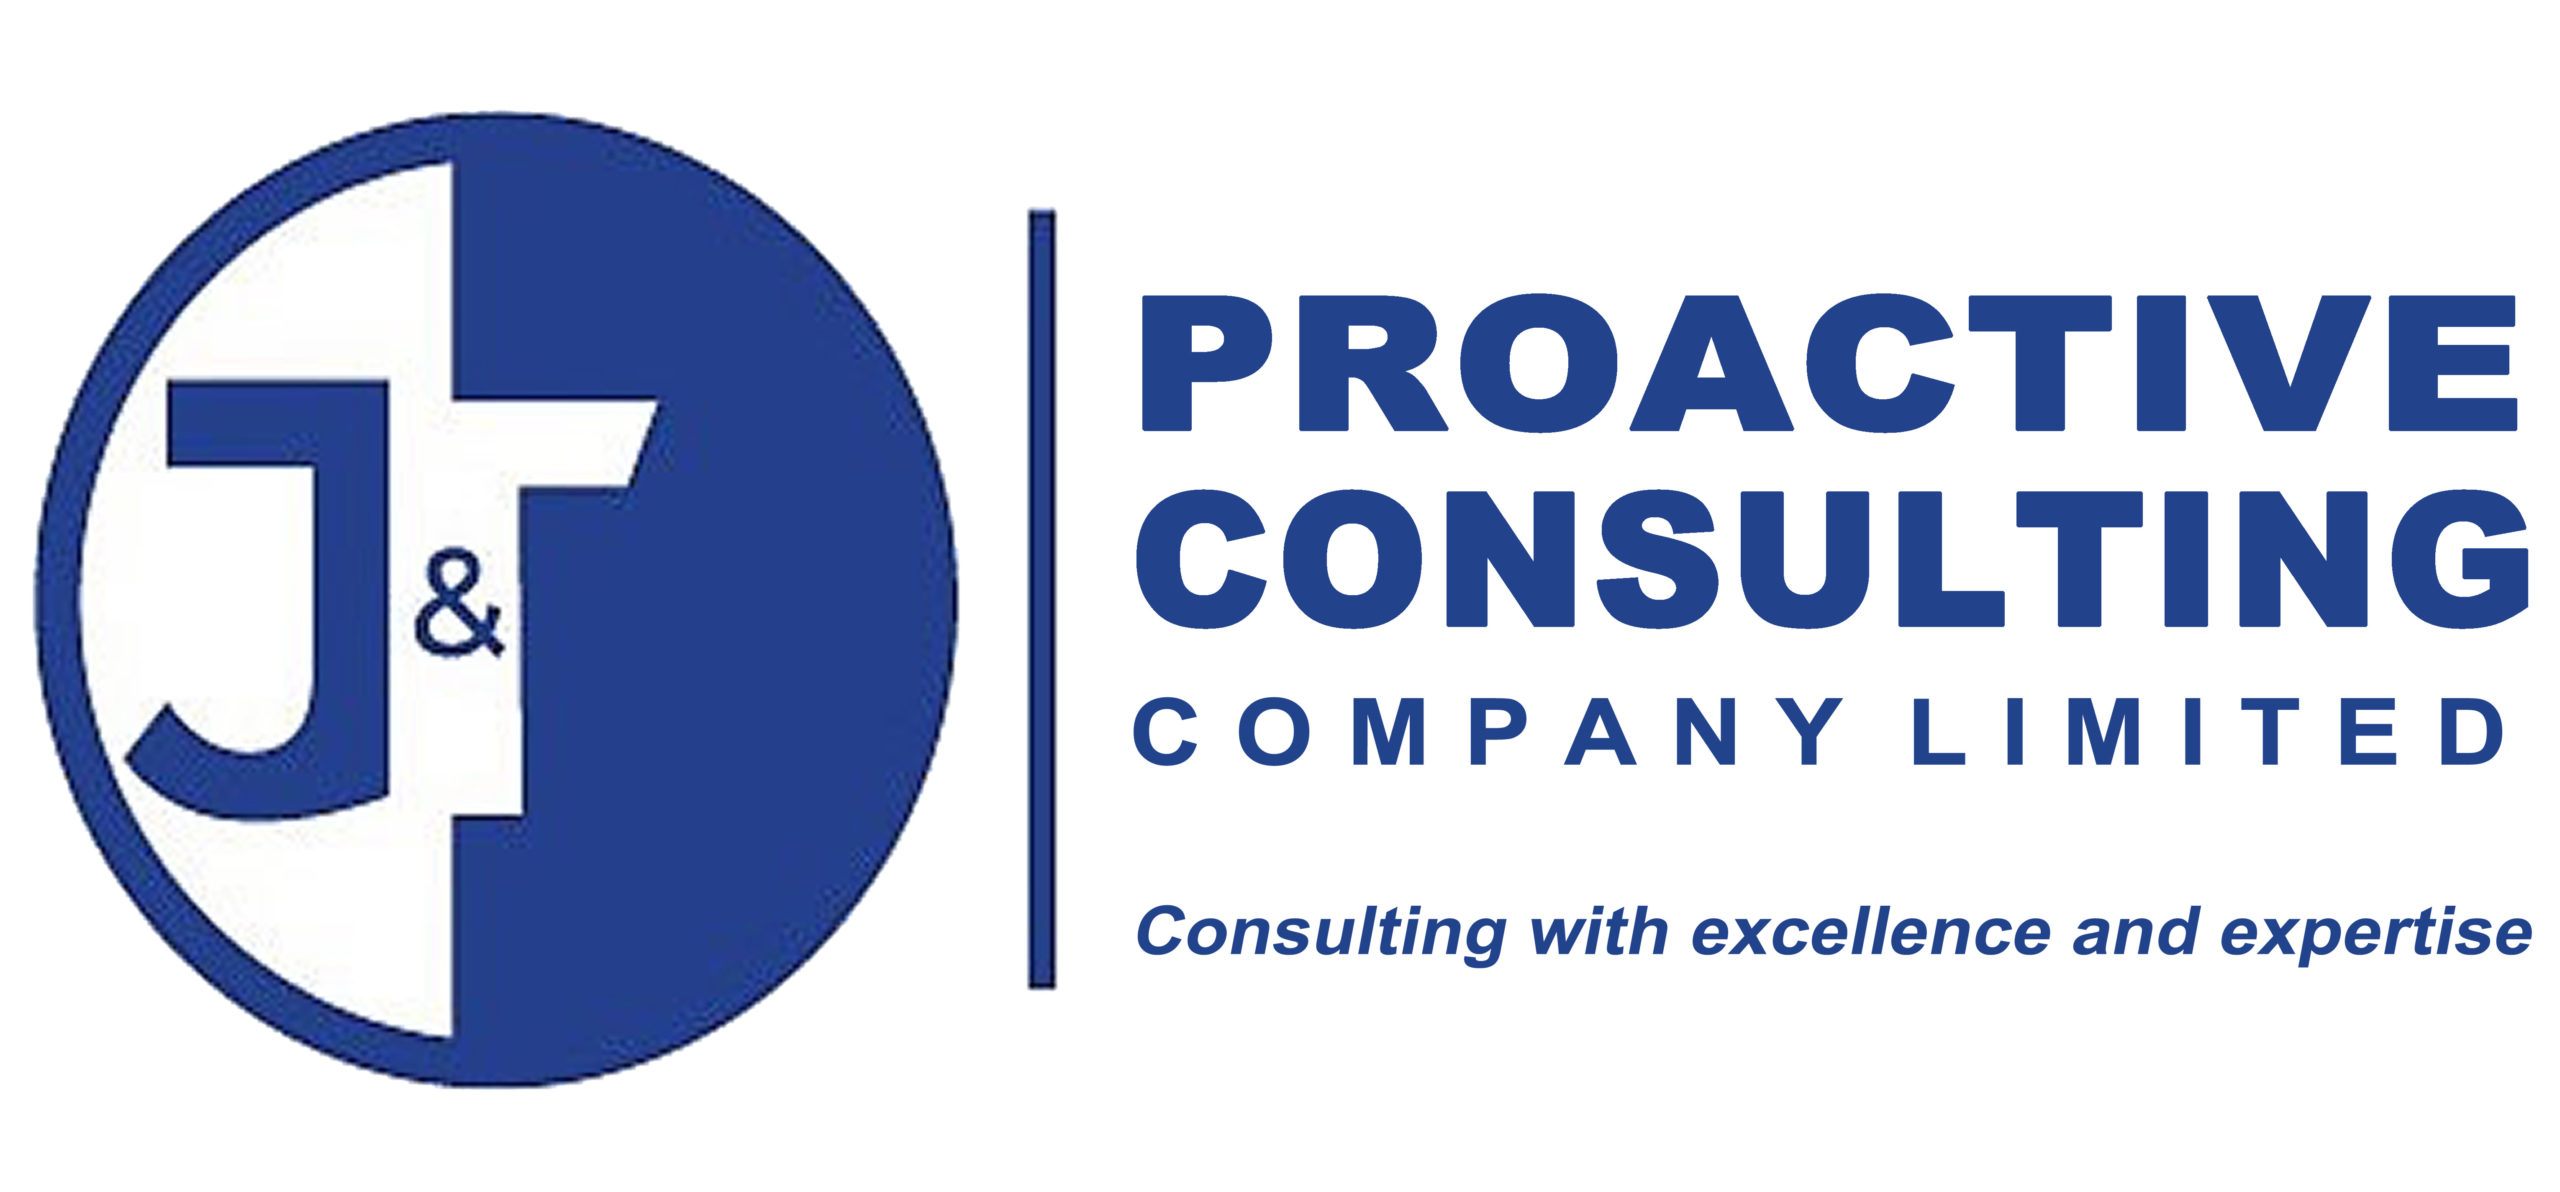 J & T Proactive Consulting Company Limited